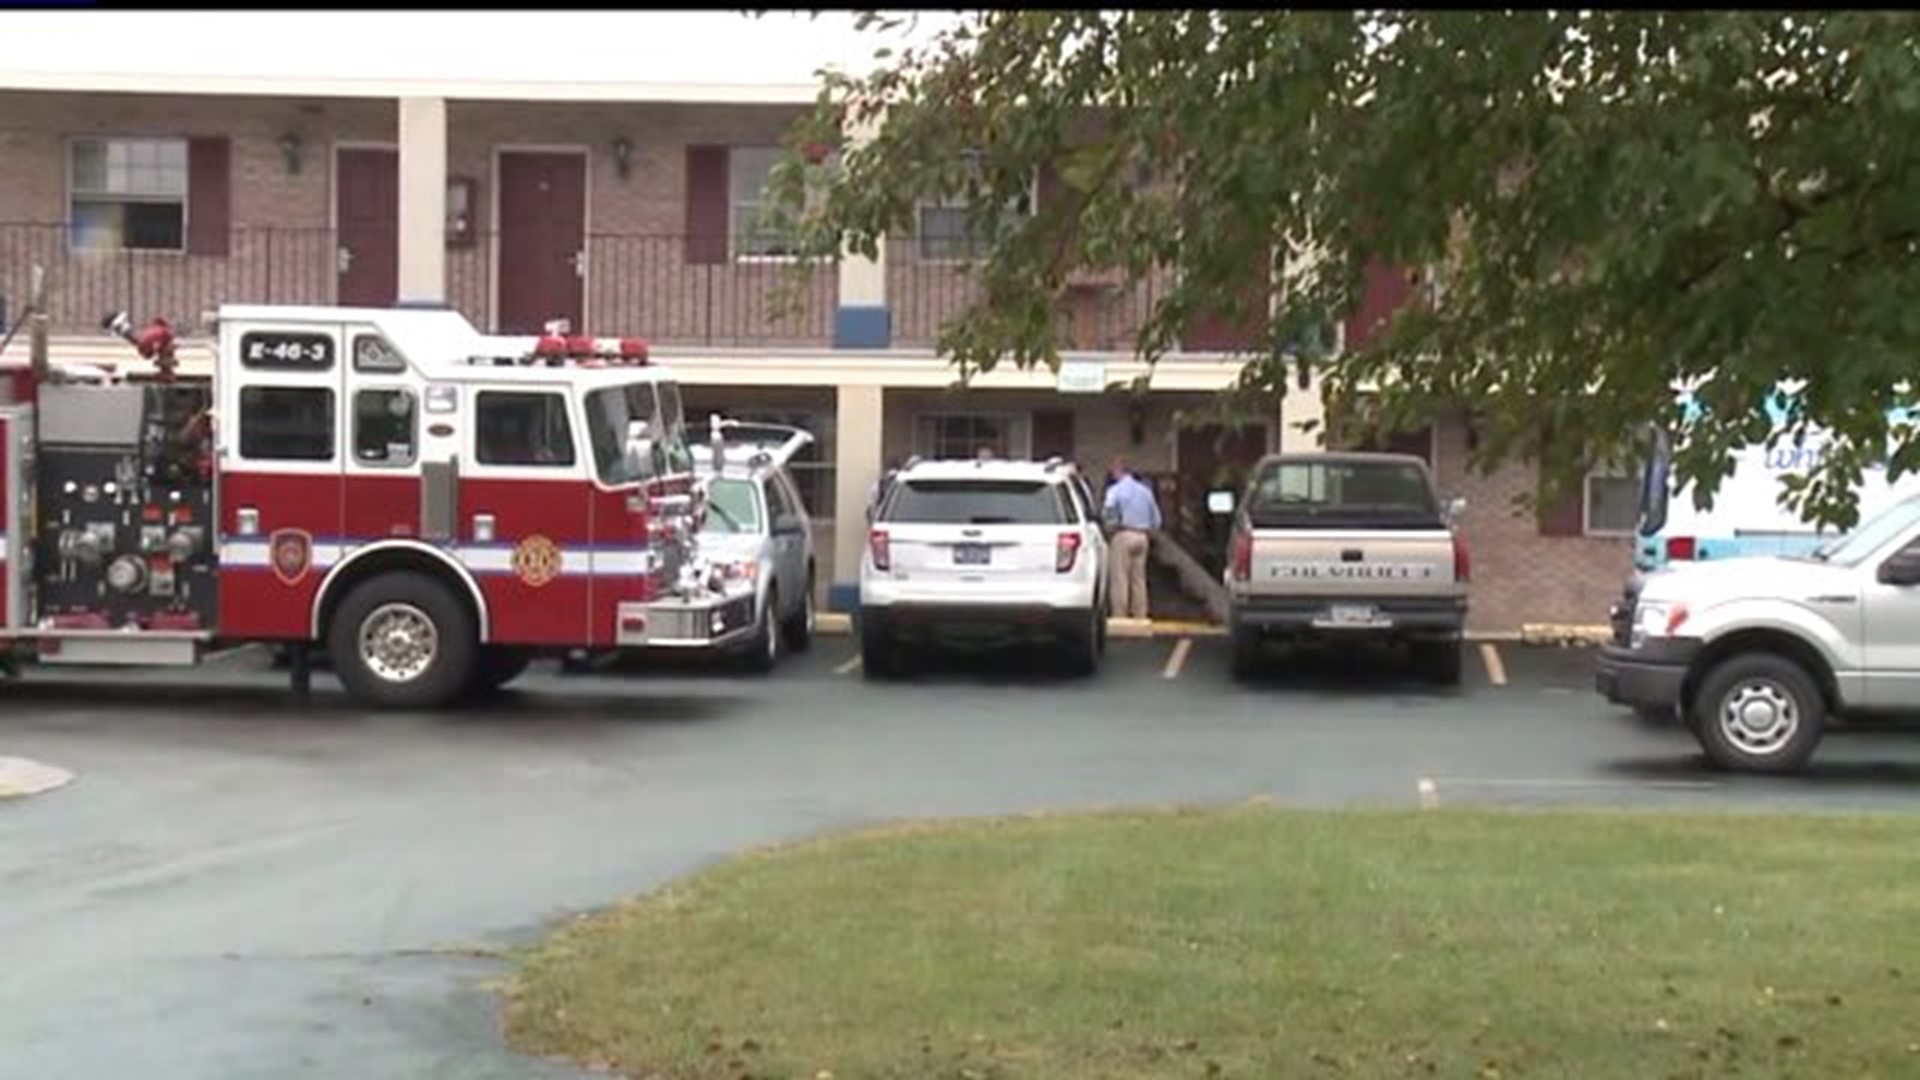 Coroner called to fire scene at Hanover Hotel and Banquet Center